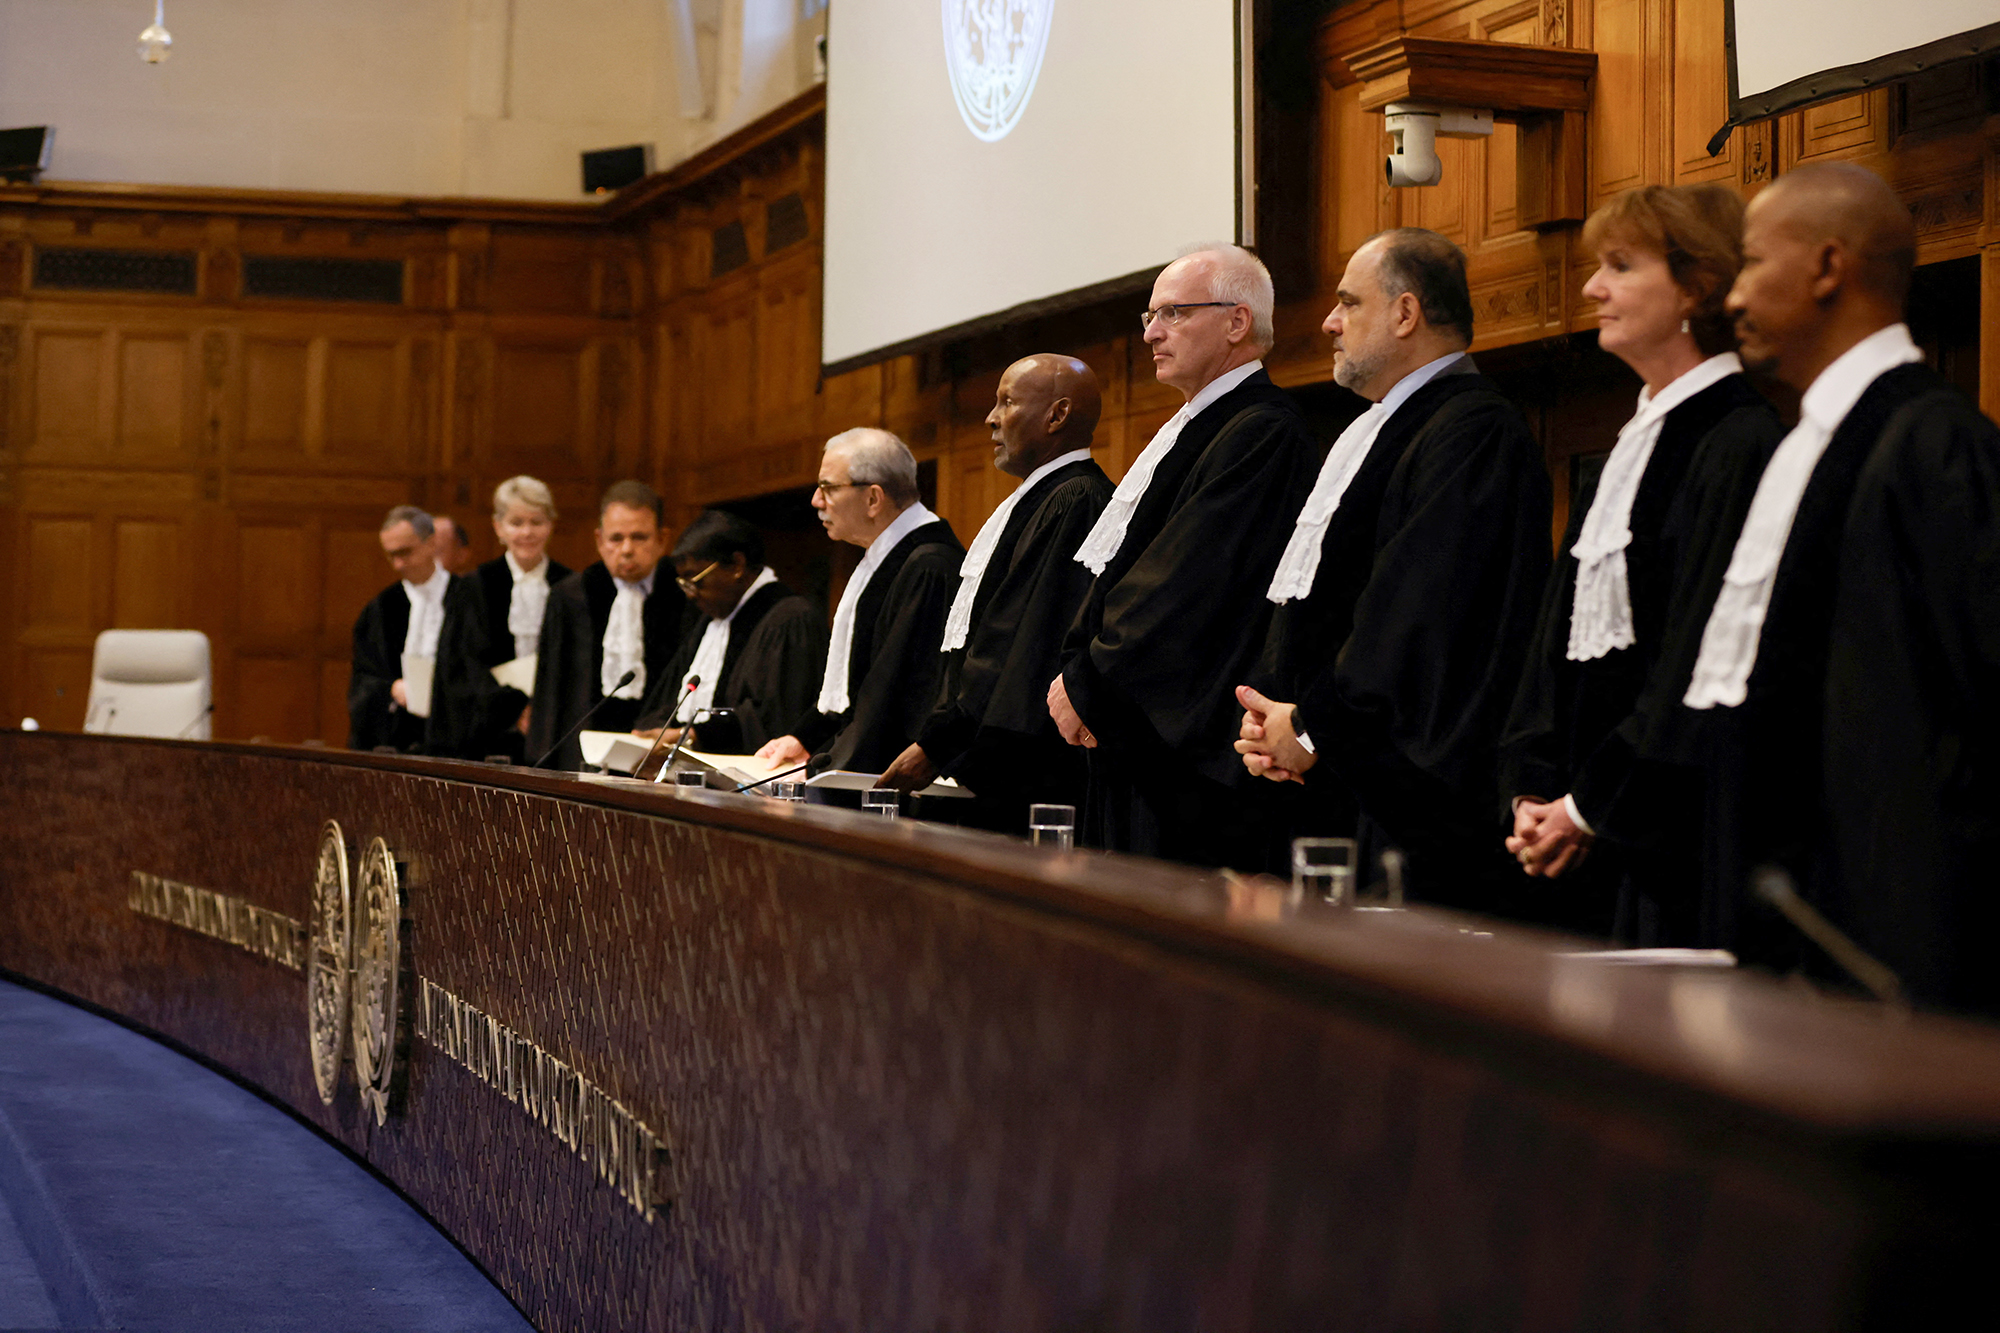 Judge Nawaf Salam, center, presides over the International Court of Justice (ICJ), during a ruling on South Africa's request to order a halt to Israel's Rafah offensive in Gaza in The Hague, Netherlands, on May 24.